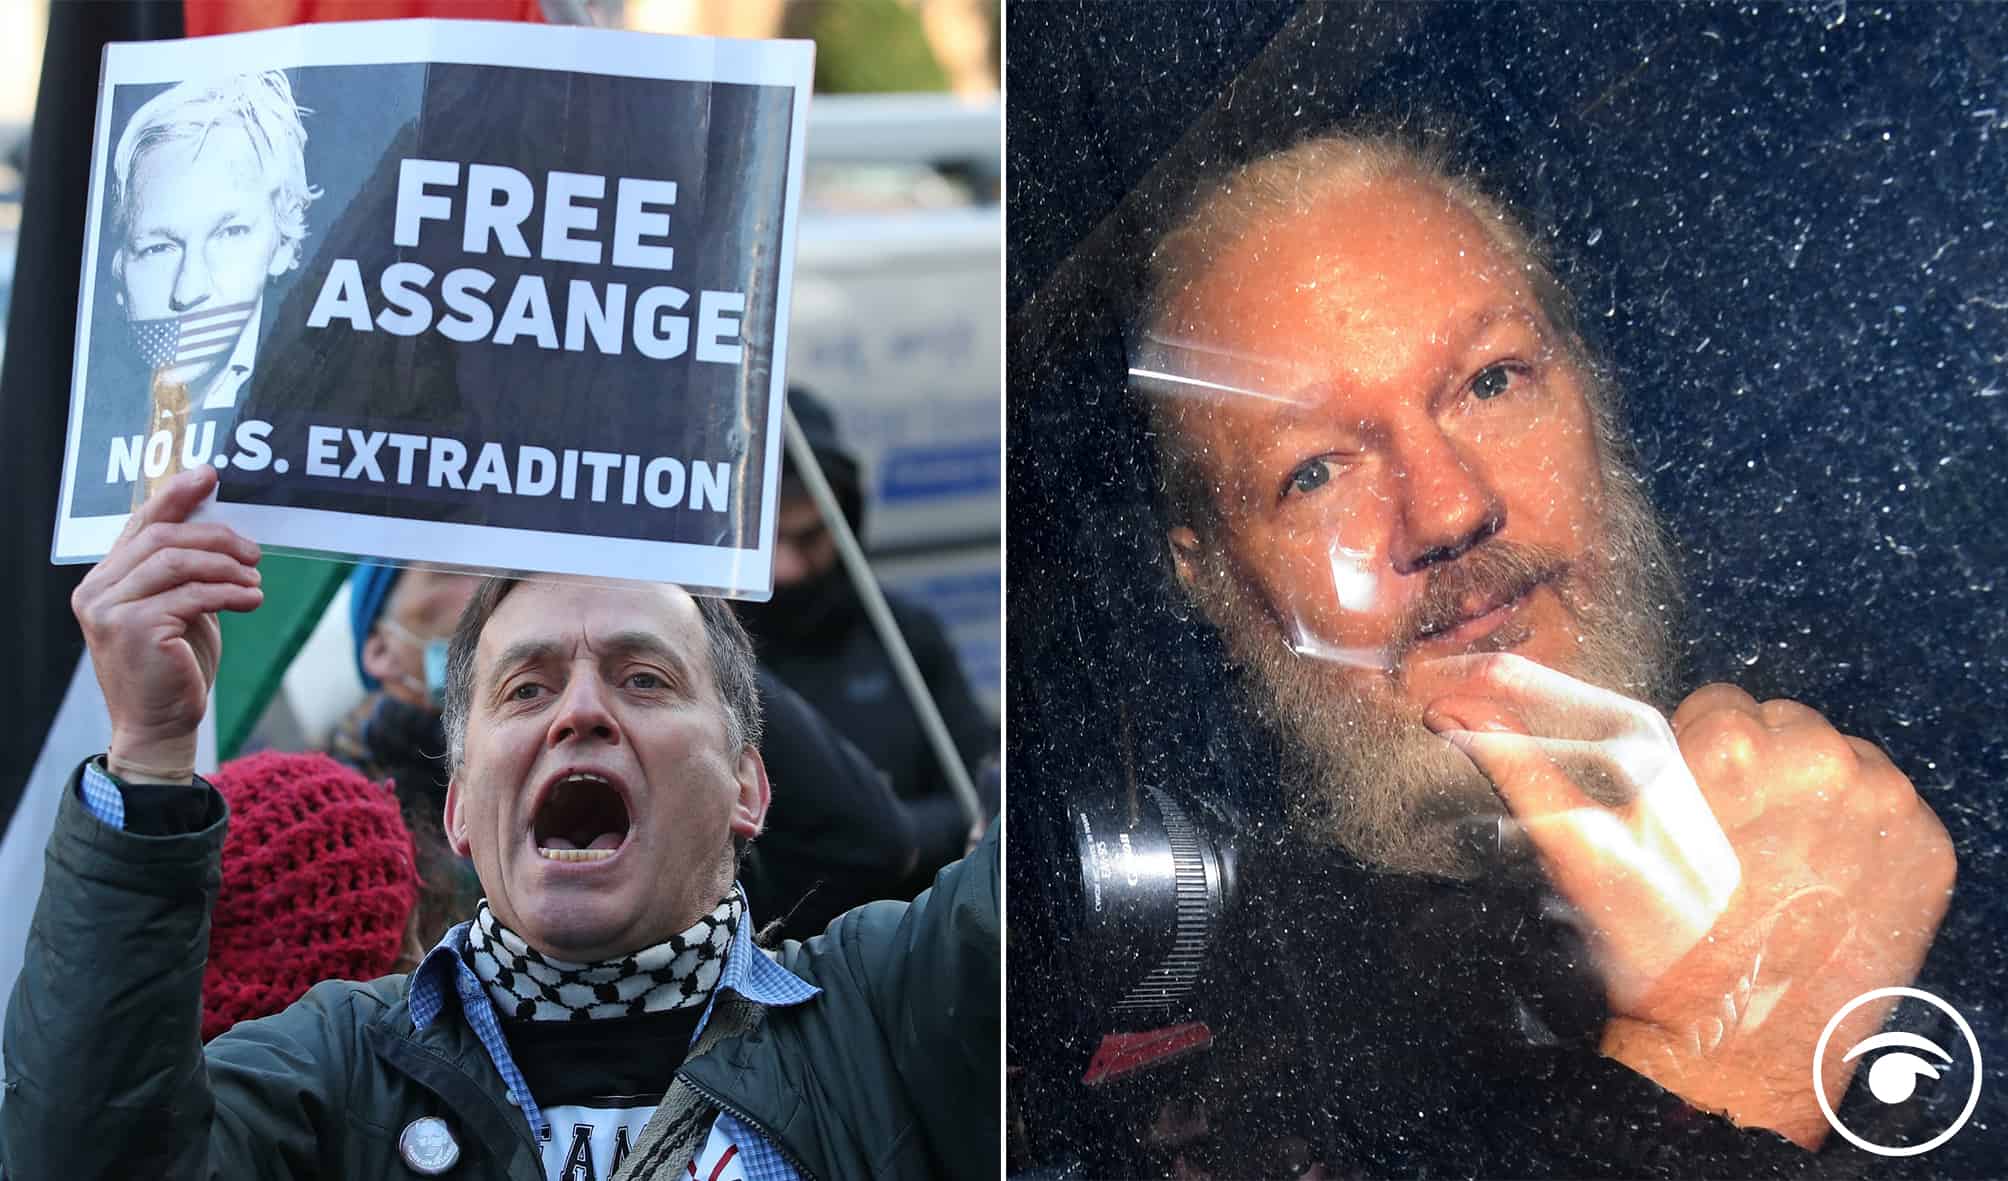 Police detain seven people over Covid-19 as Julian Assange refused bail